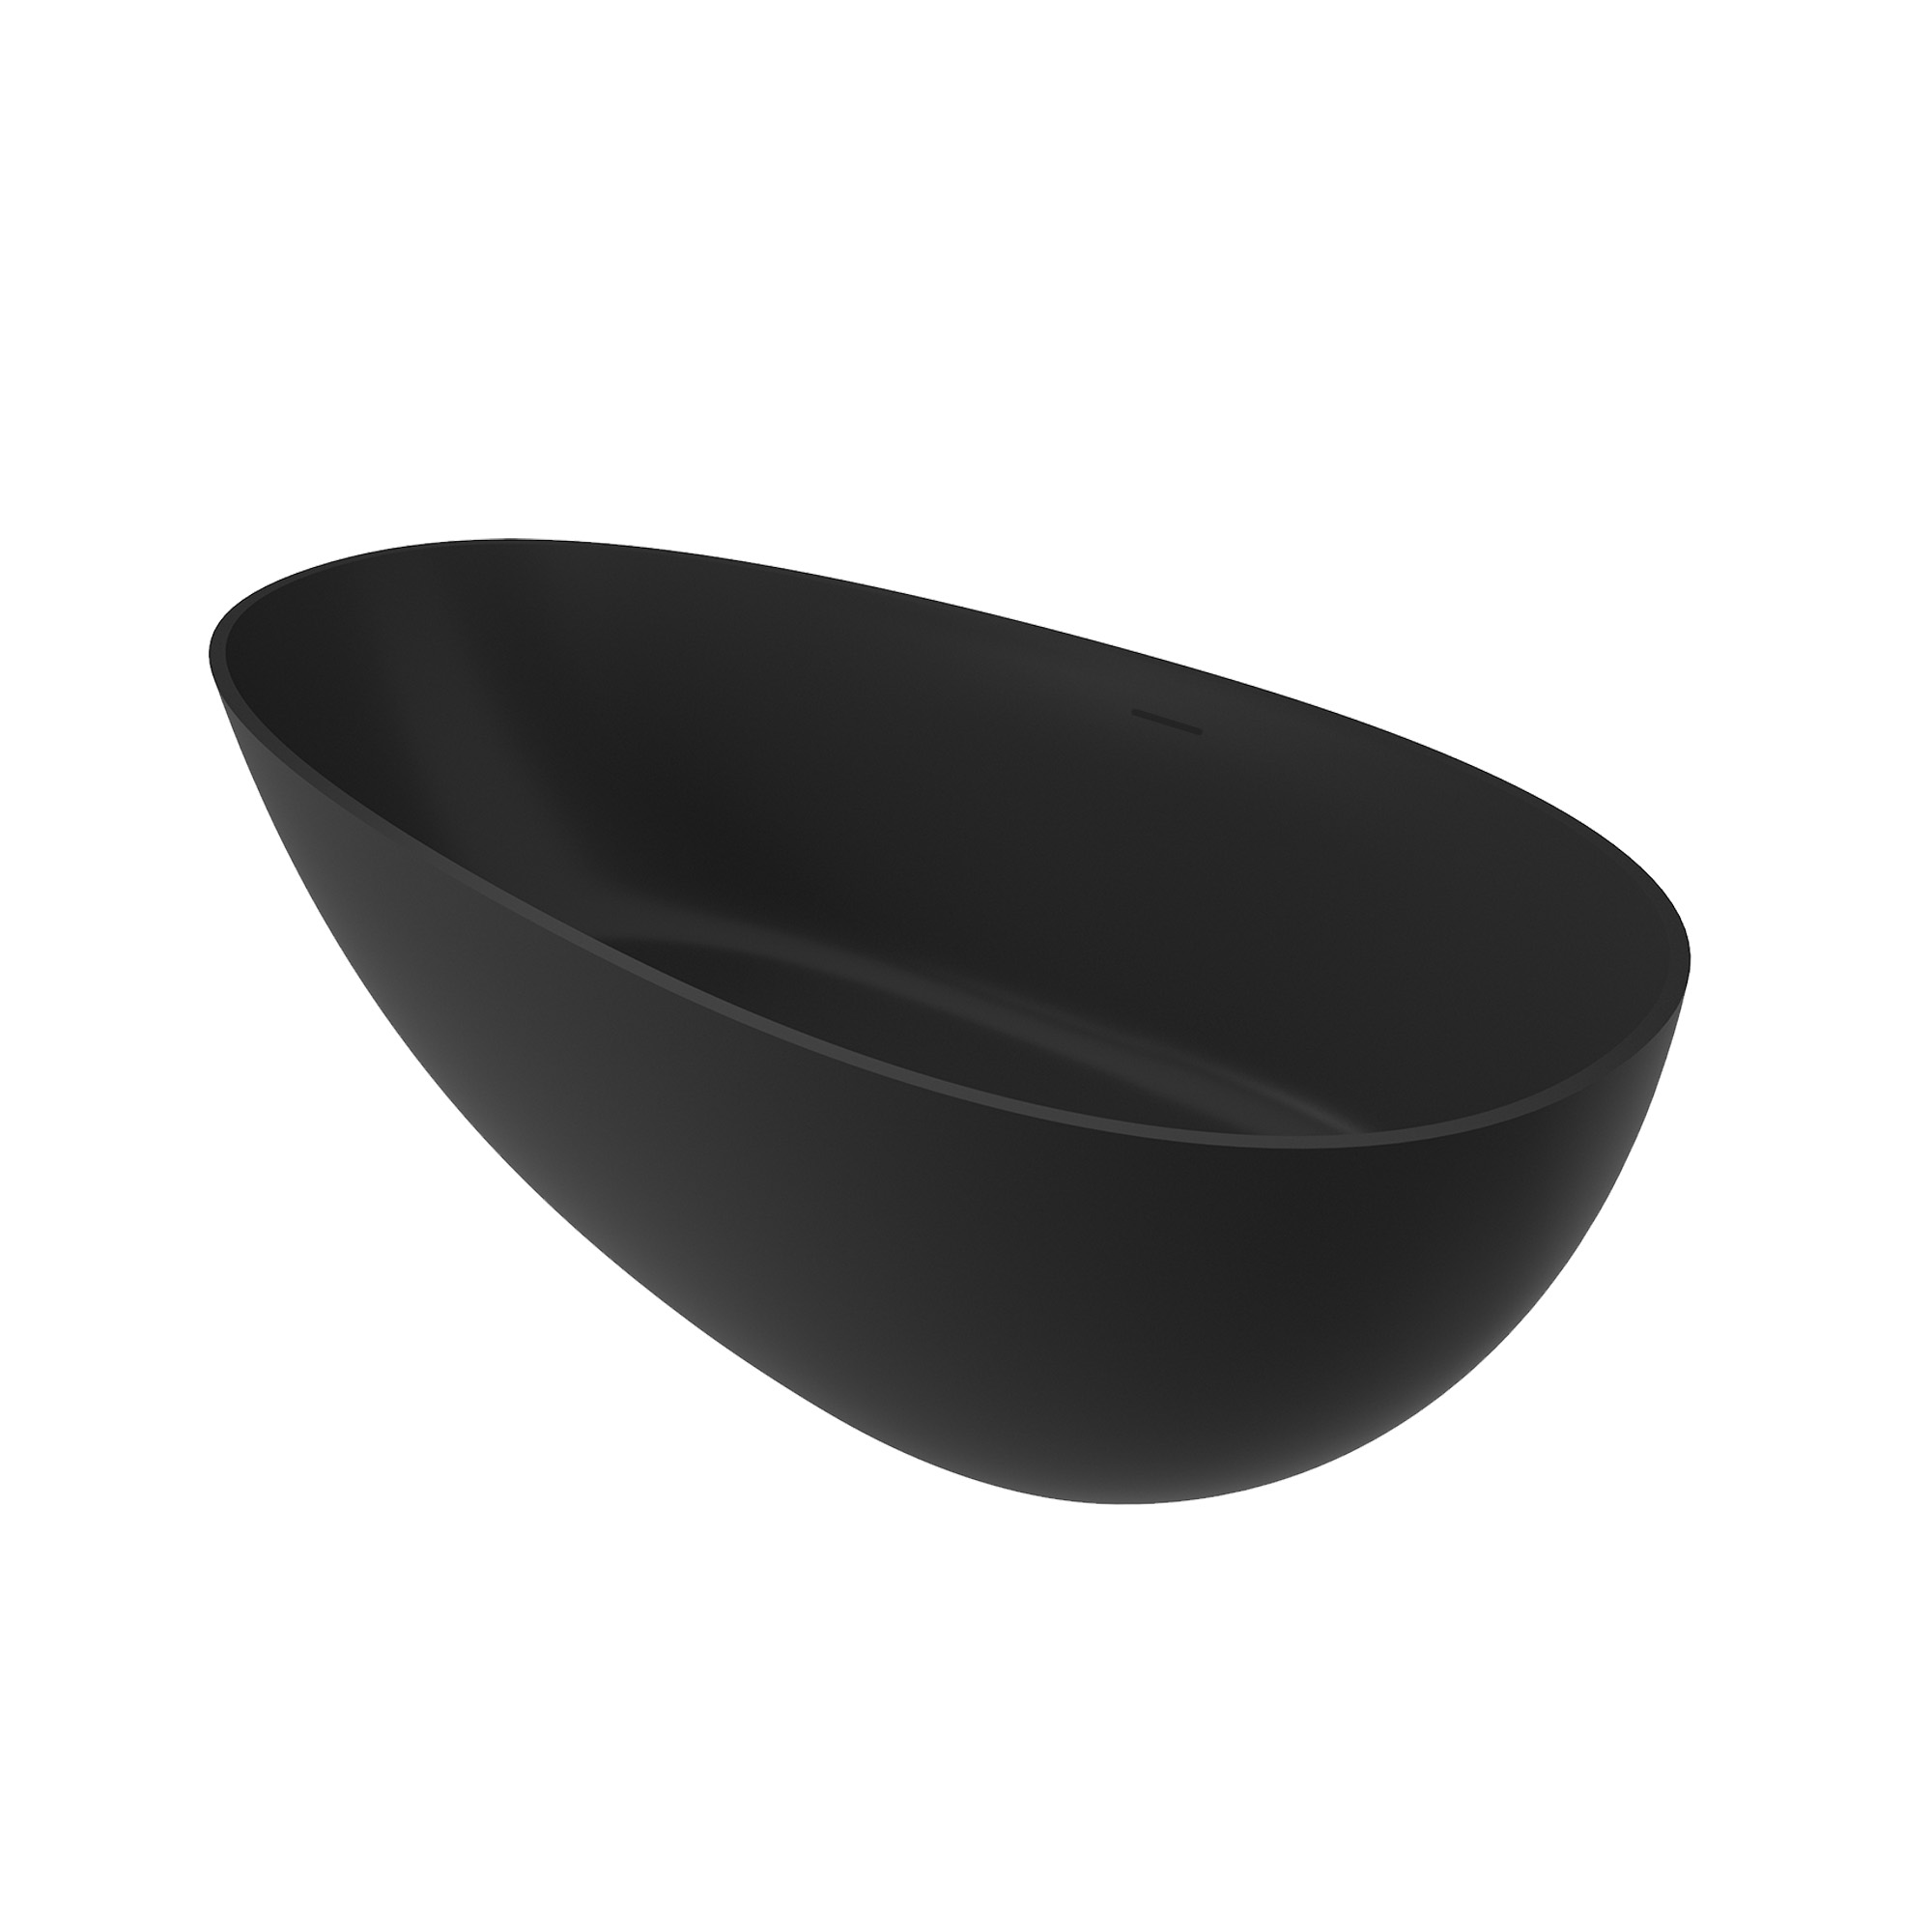  67" Solid Surface Bathtubs, Egg Shell Shapes Stone Resin Freestanding Tubs, Contemporary Oval Soaking Tub with Overflow and Center Drain, Matte Black Color